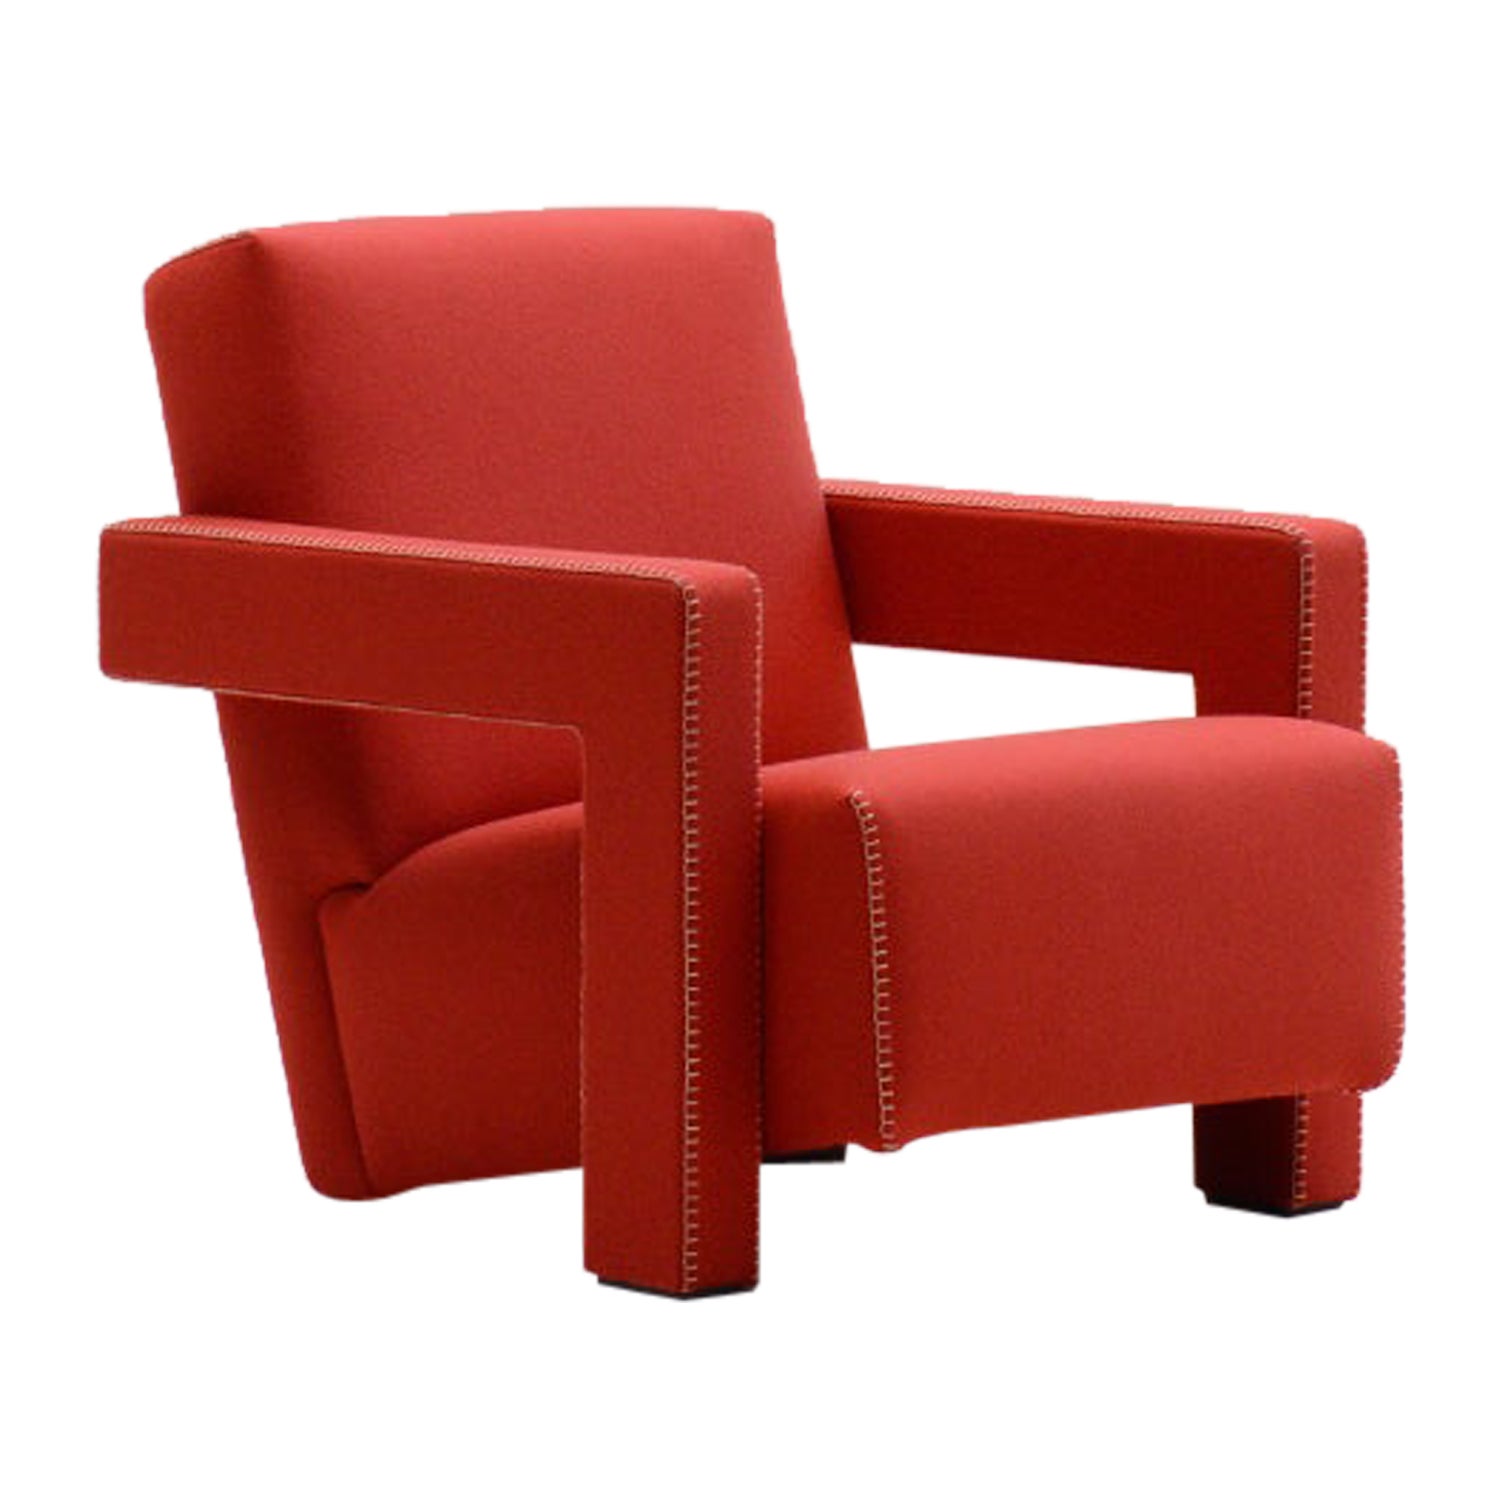 “Utrecht” chair by Gerrit Rietveld for Cassina, 1990s Italy. For Sale